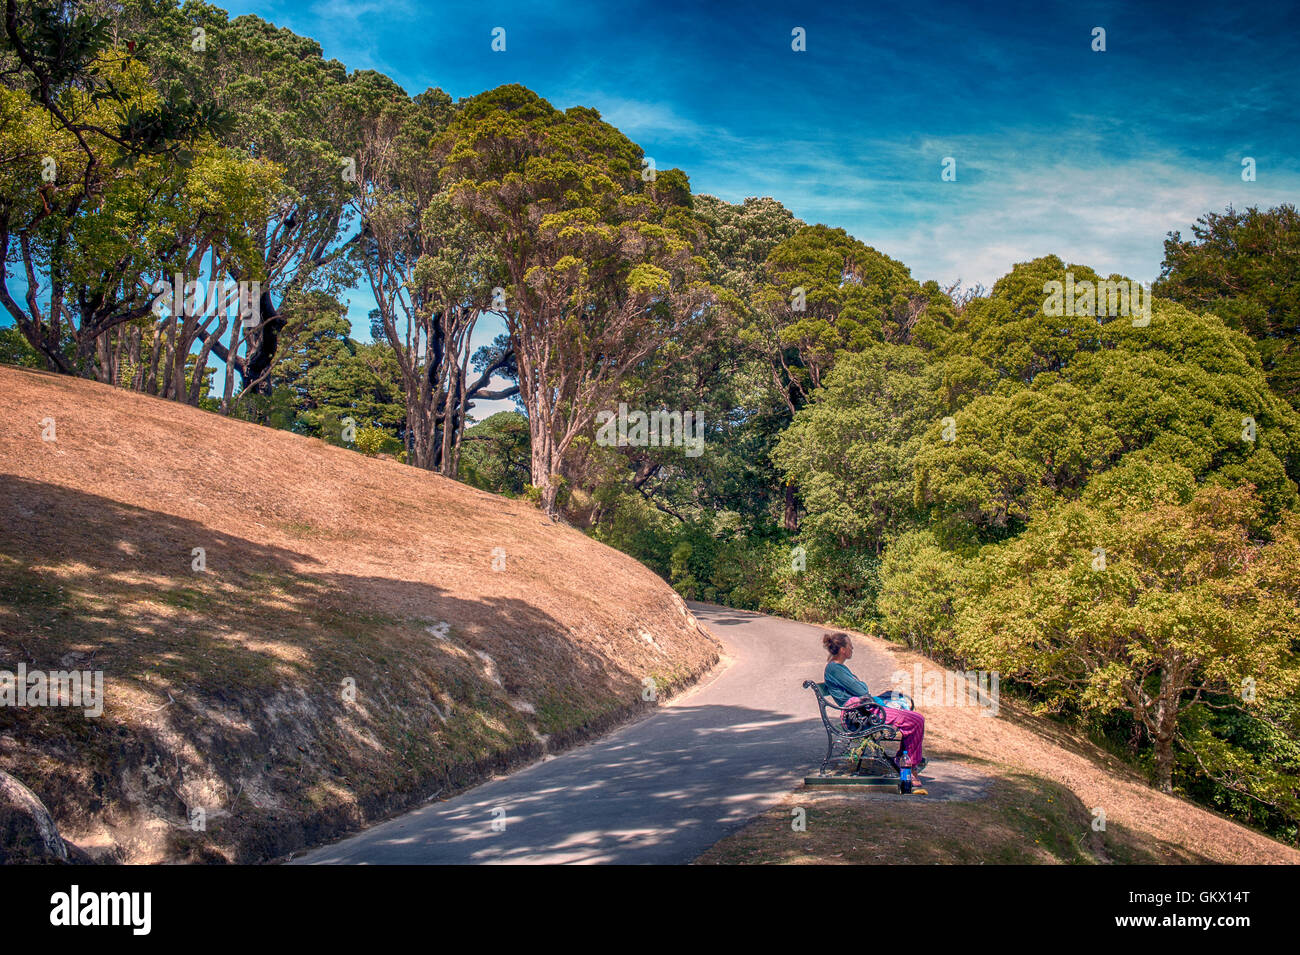 Wellington, New Zealand - March 2, 2016: Local people resting at Wellington Botanic Garden, the largest public park in town Stock Photo